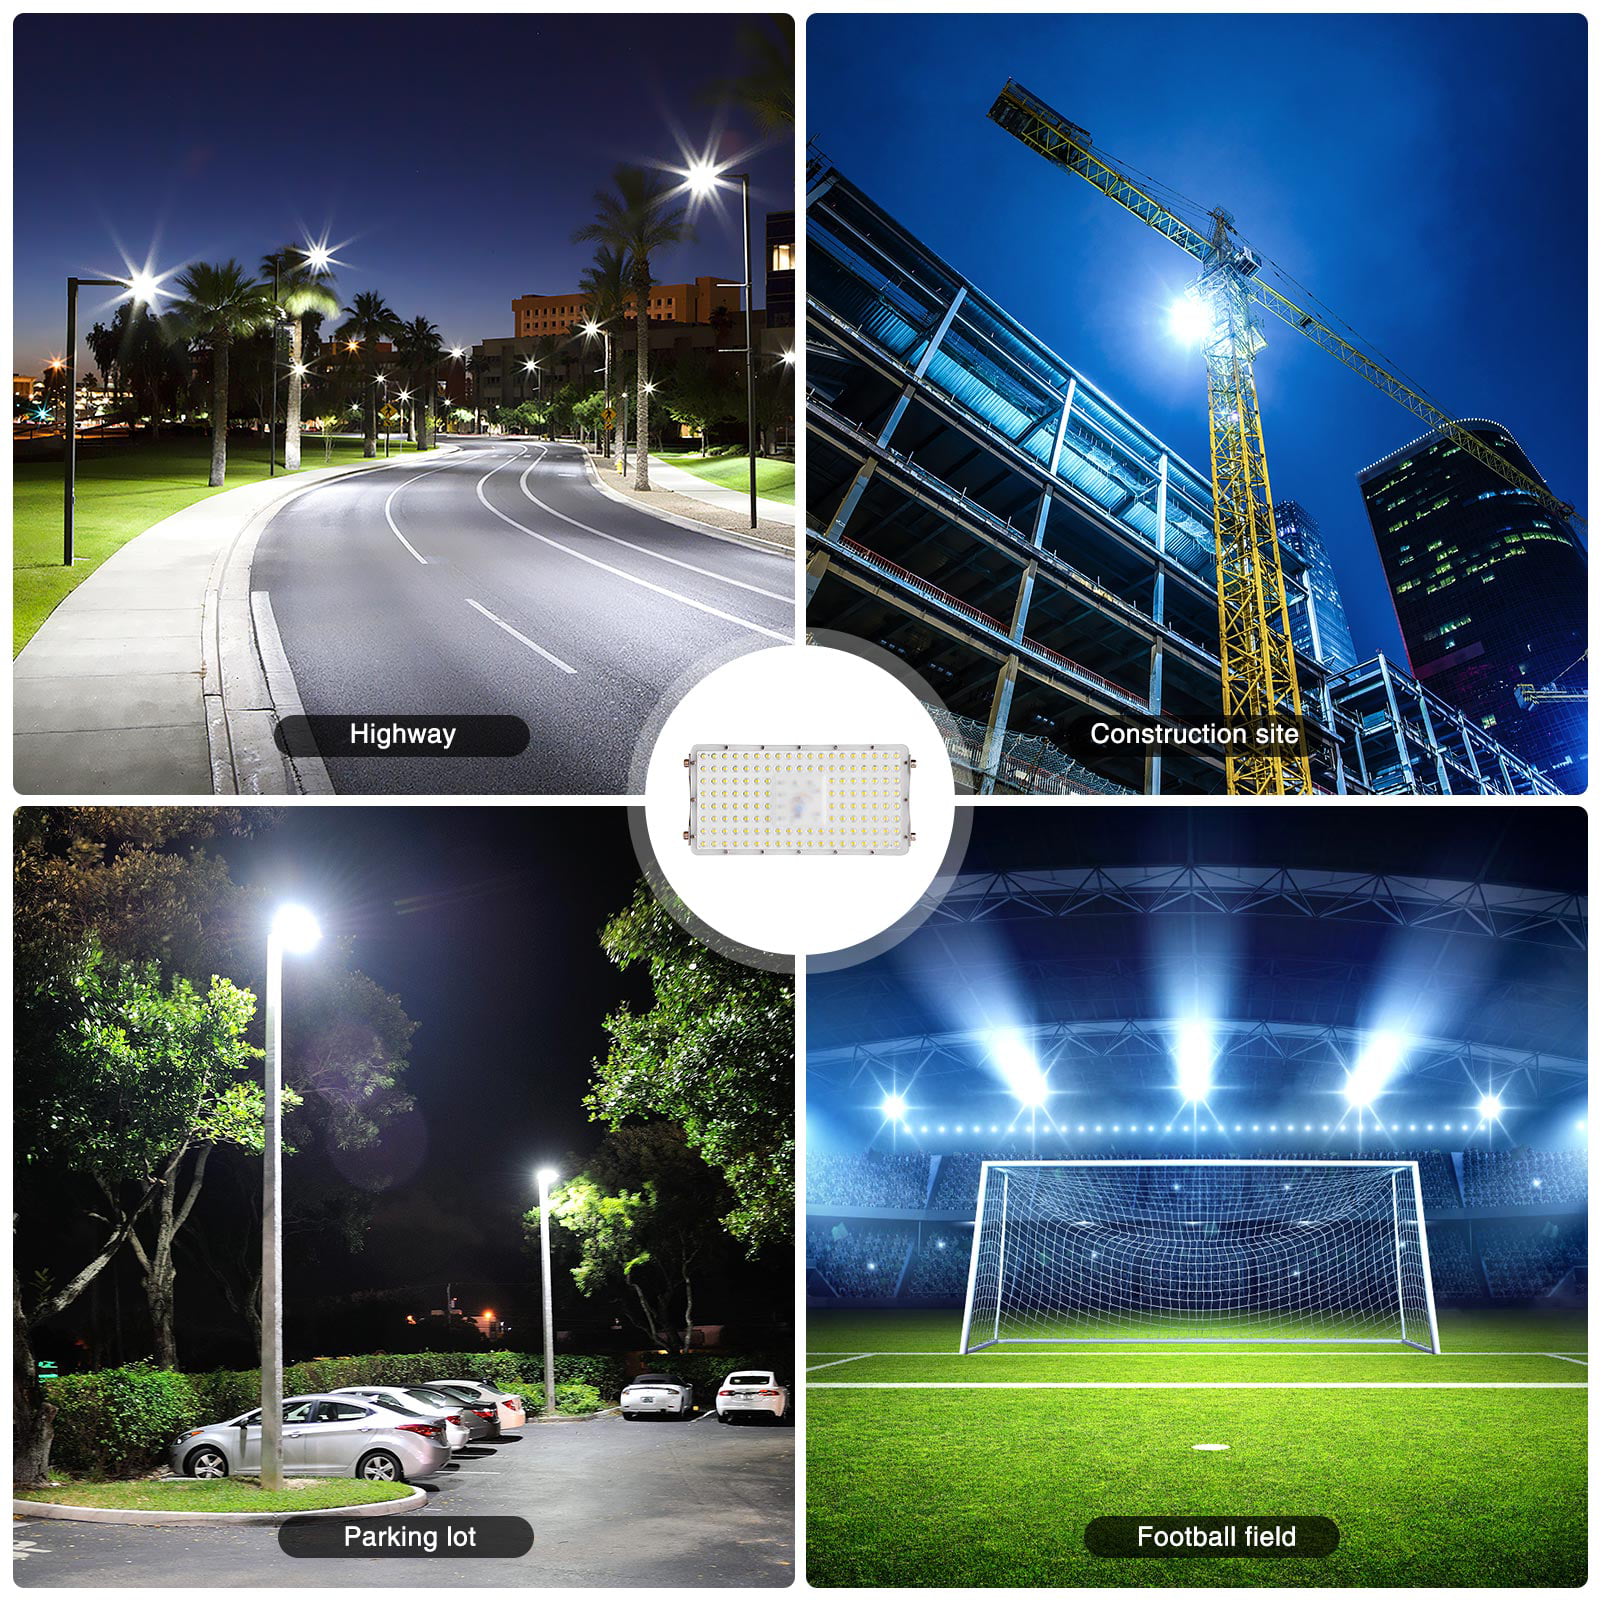 Details about   LED Flood Light 100W 200W 300W Outdoor Spotlight Garden Yard Lamp Cool White US 